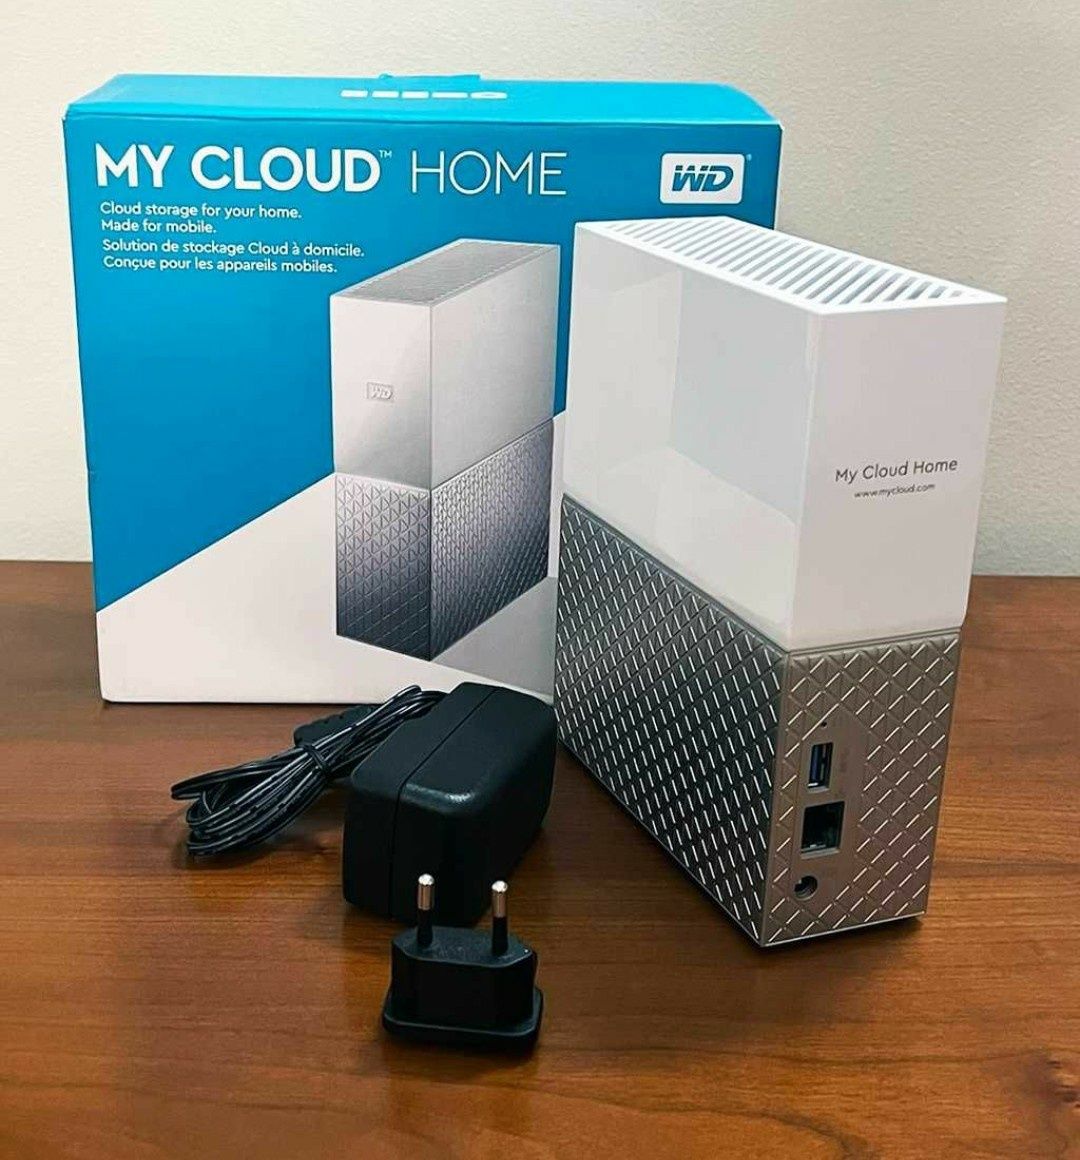 NAS (Network Attached Storage)
Western Digital 4TB My Cloud Home